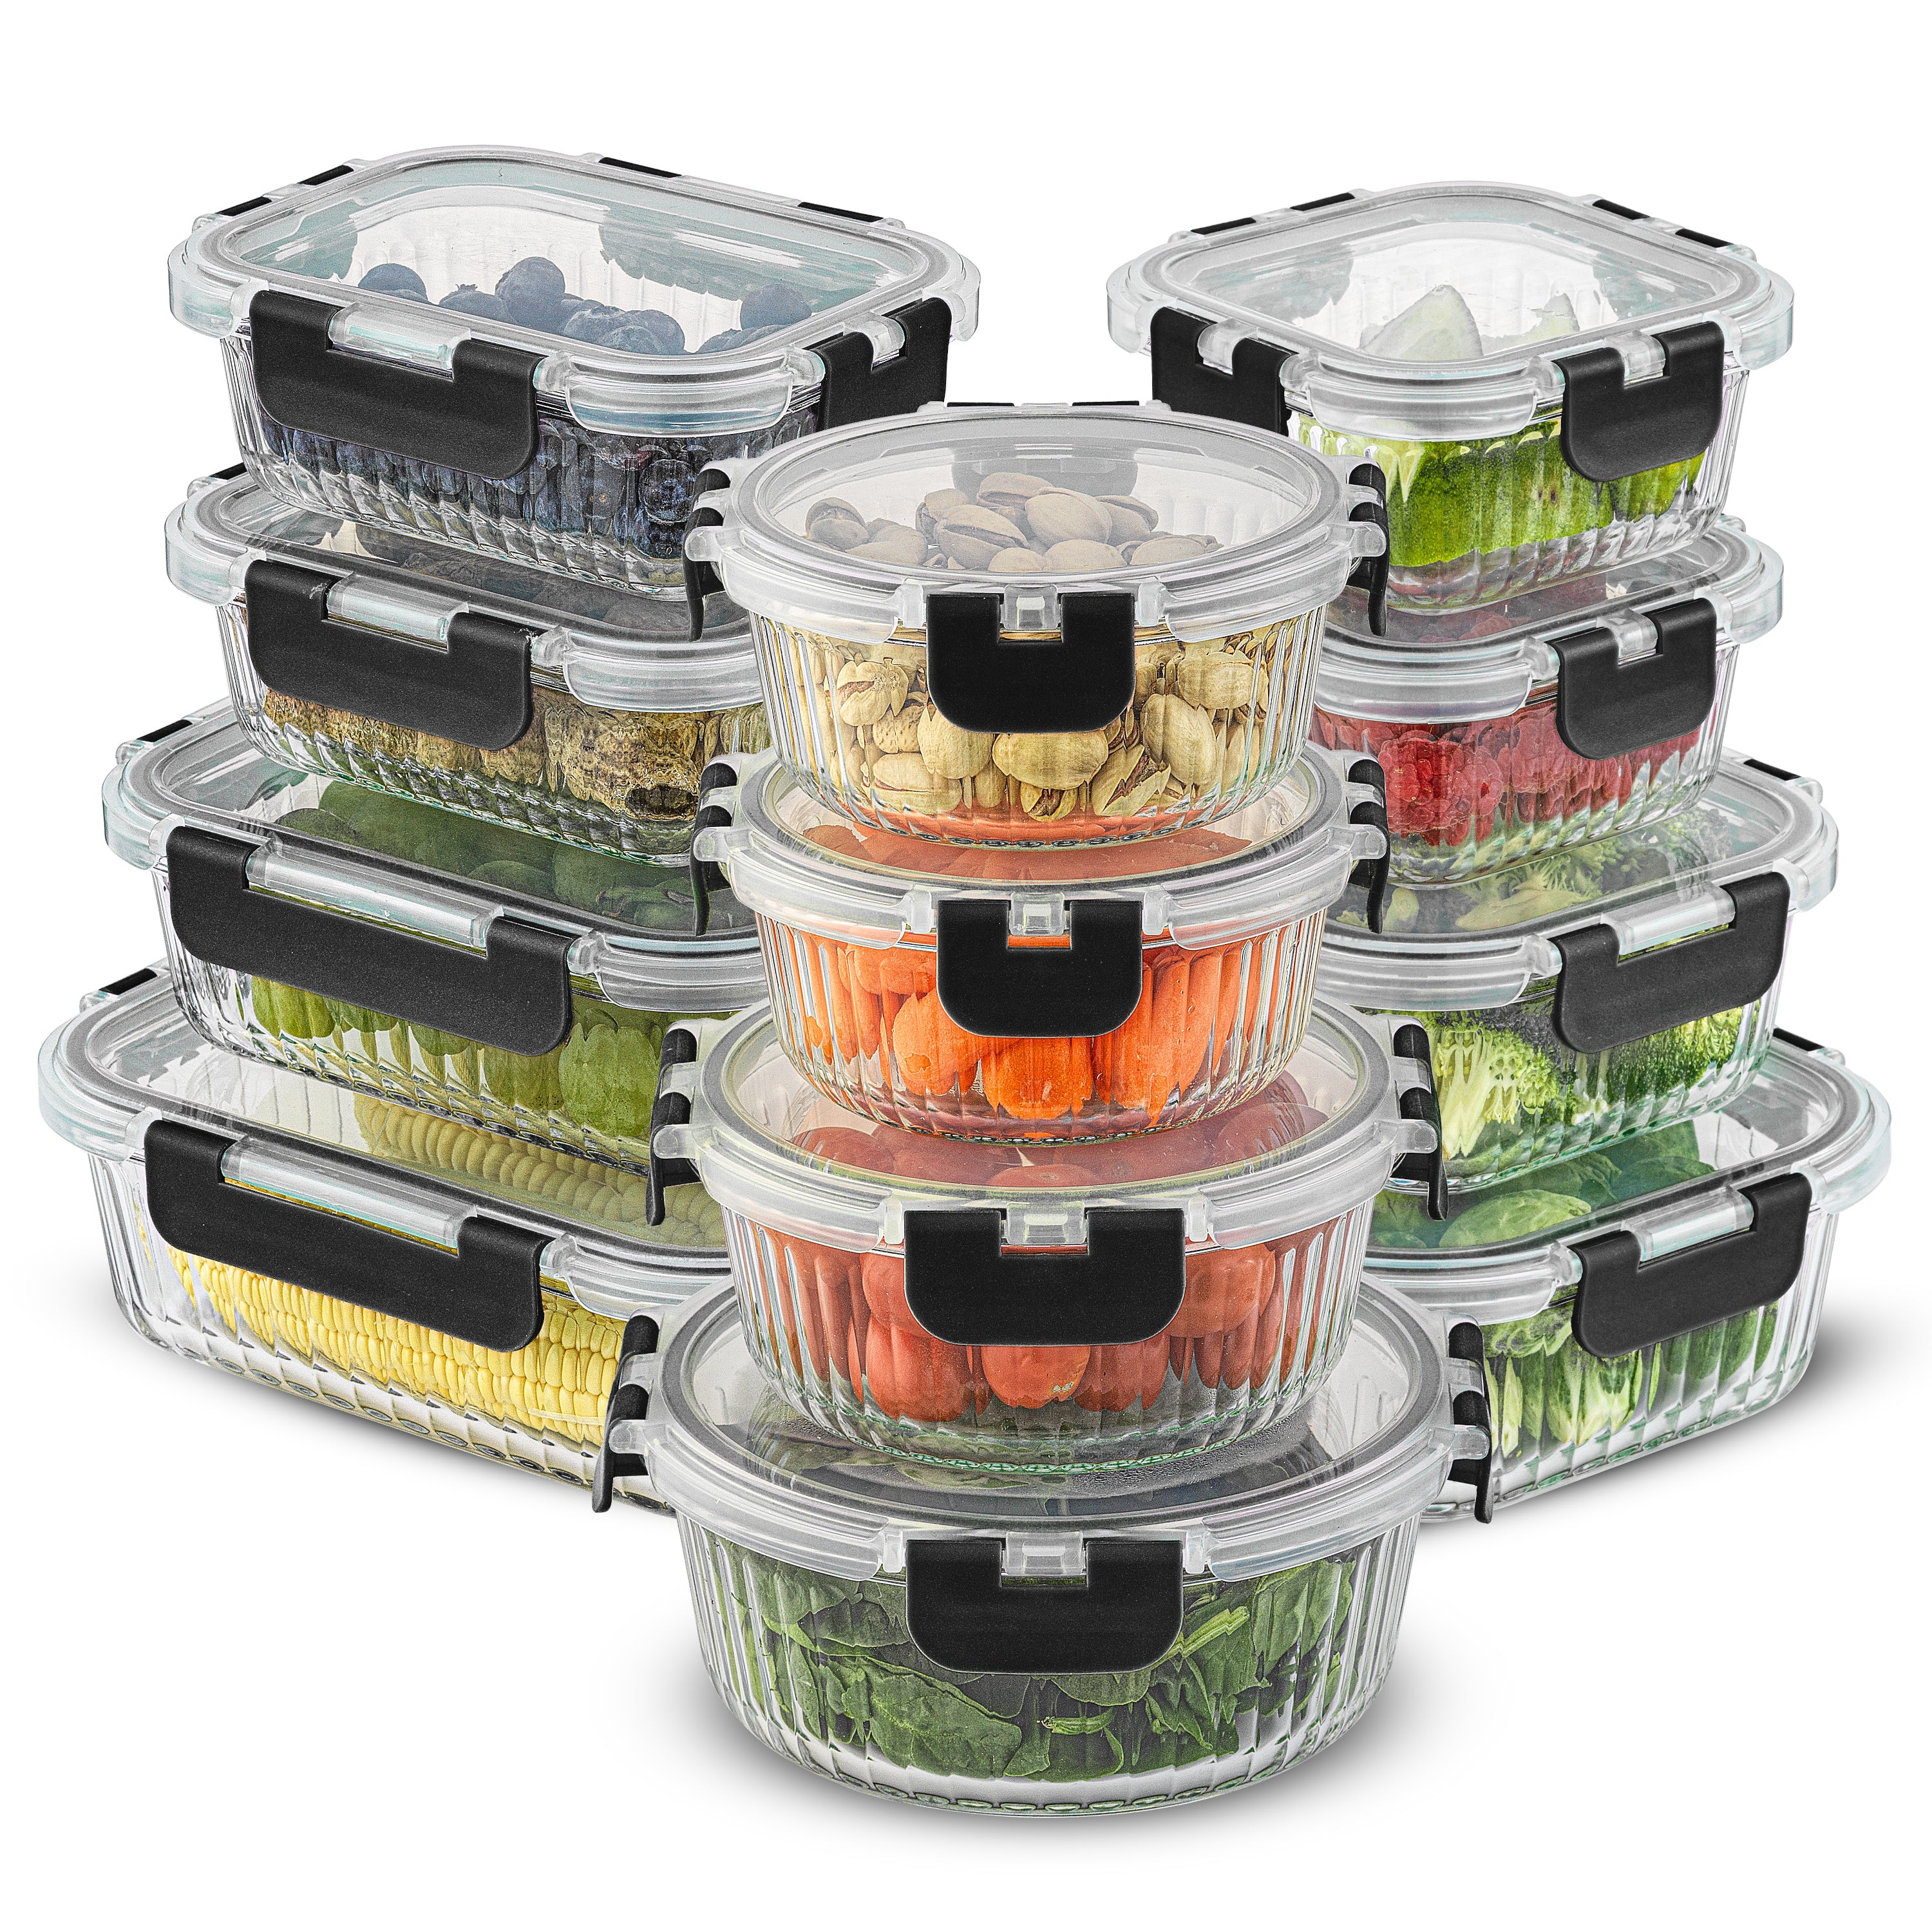 JoyJolt 12pc Fluted Glass Containers & Leakproof Lids